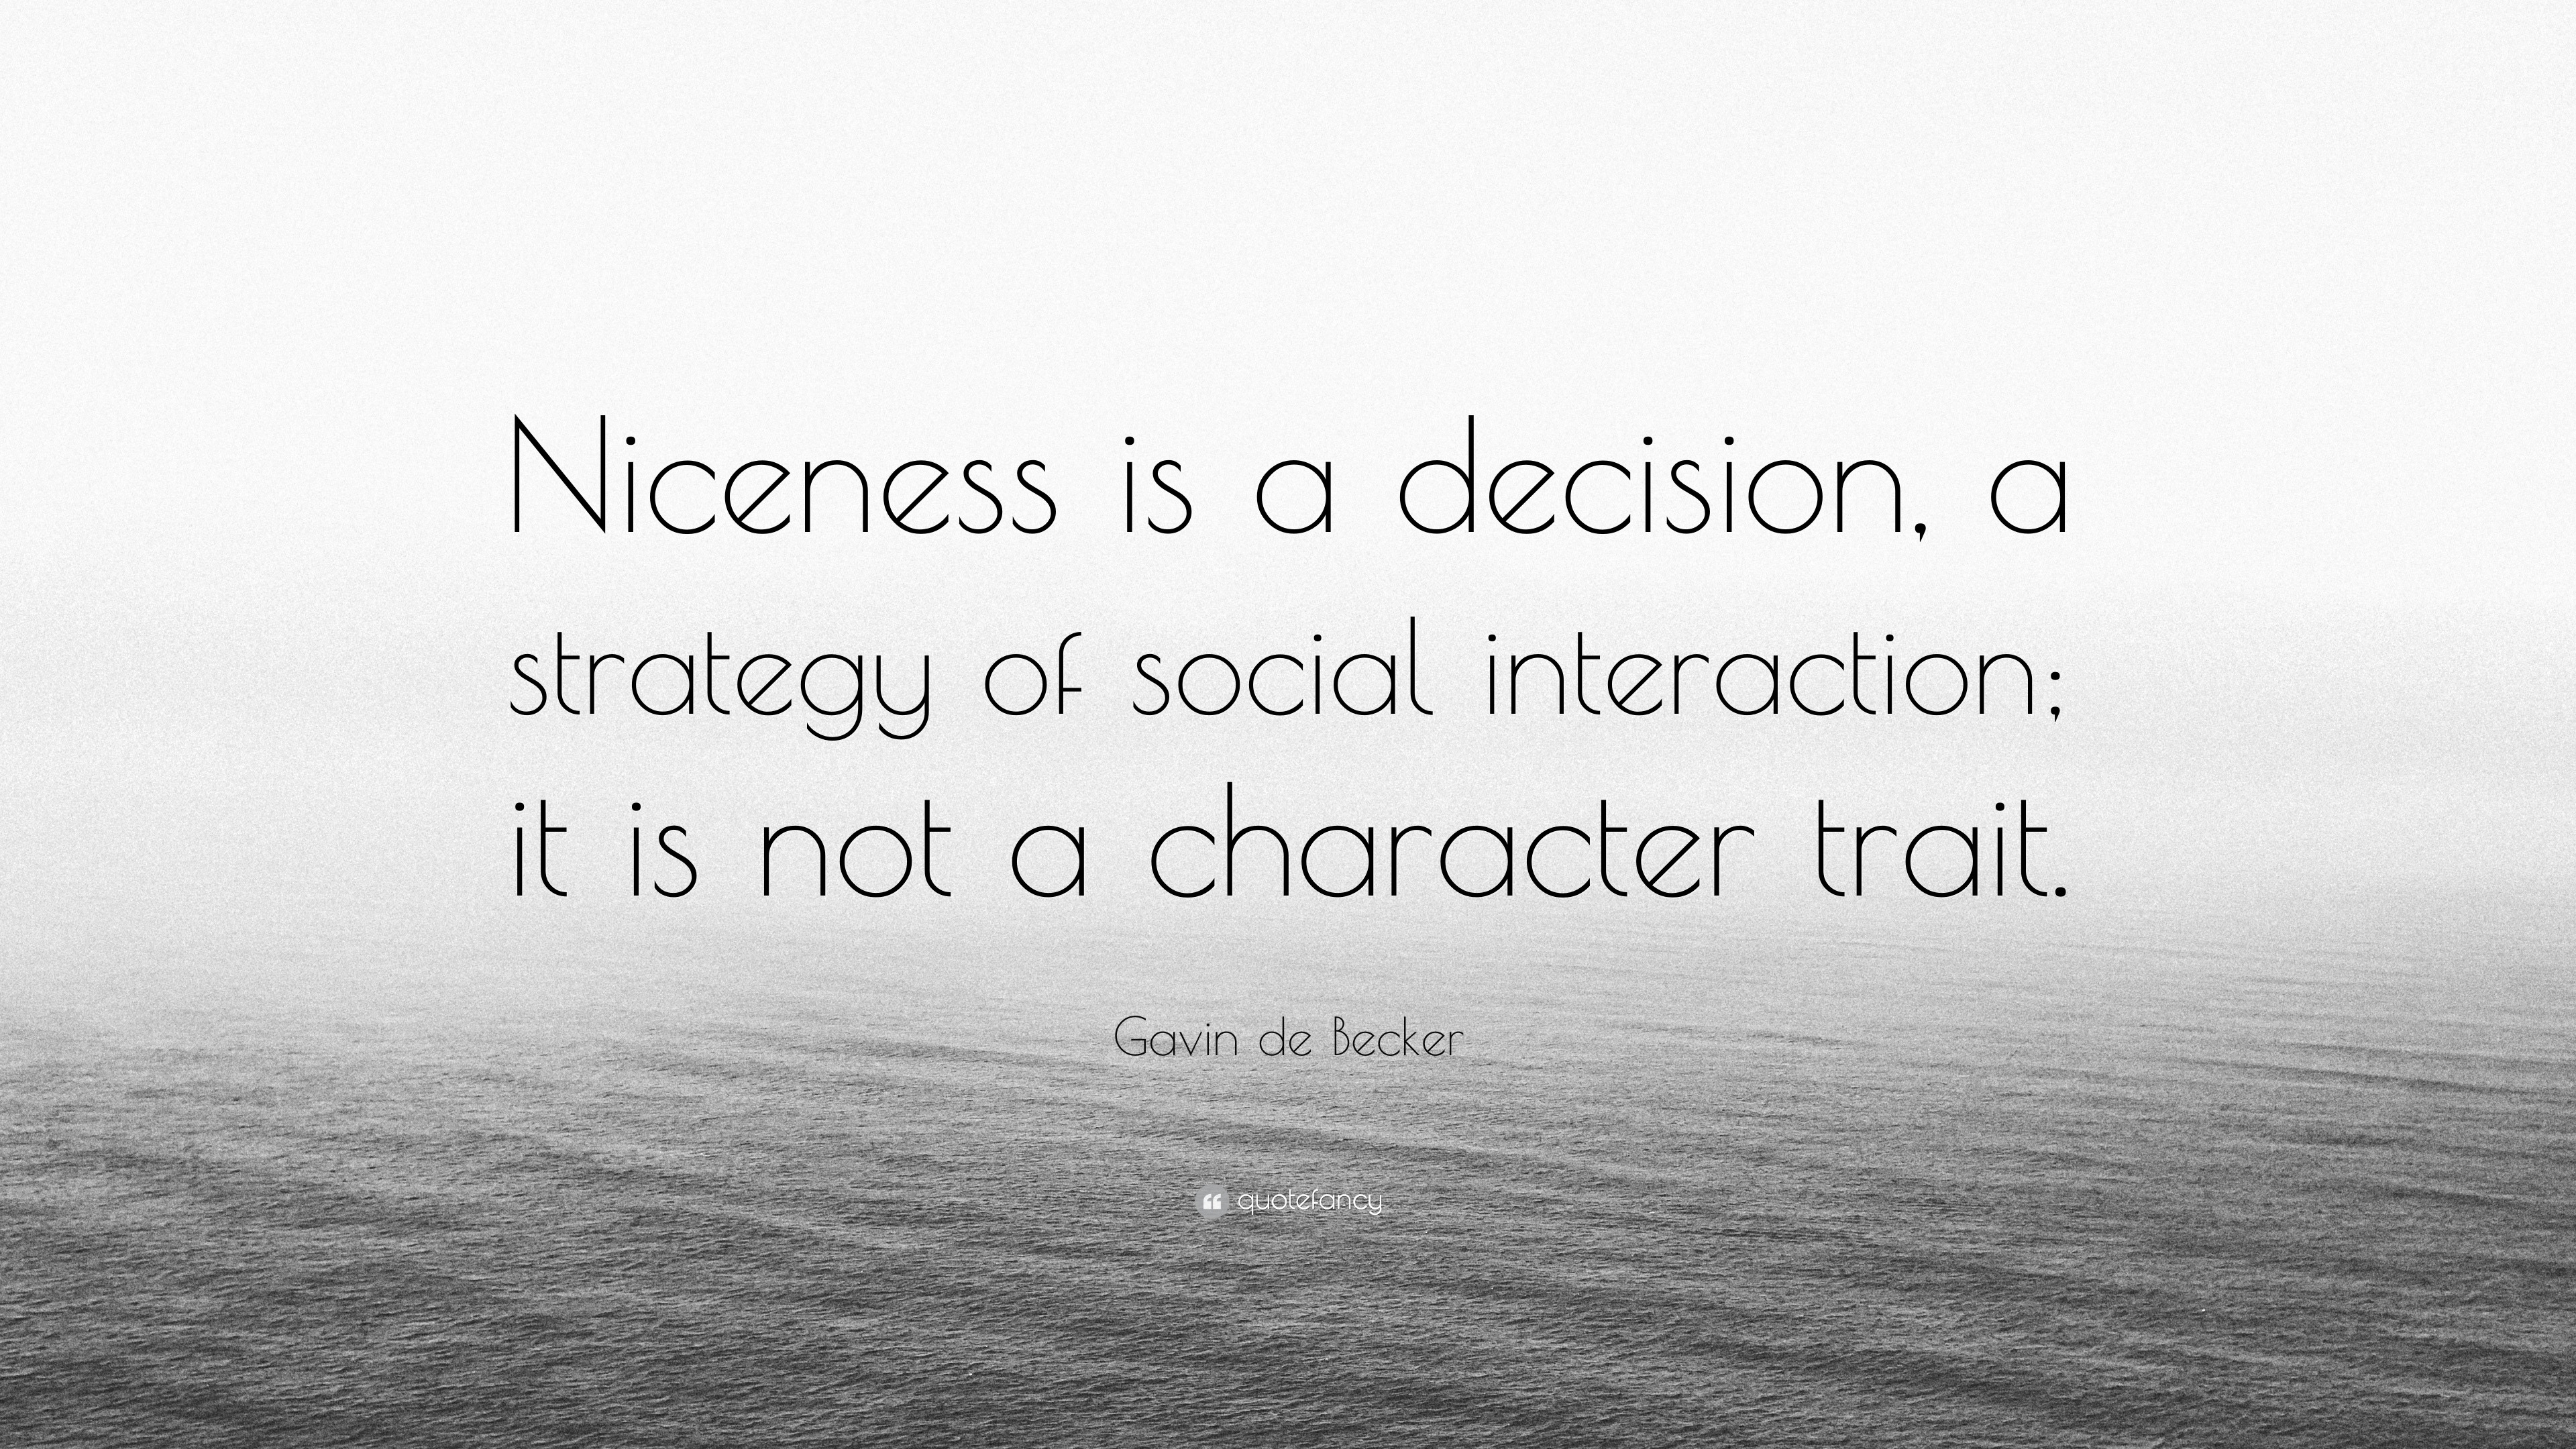 Gavin de Becker Quote: “Niceness is a decision, a strategy of